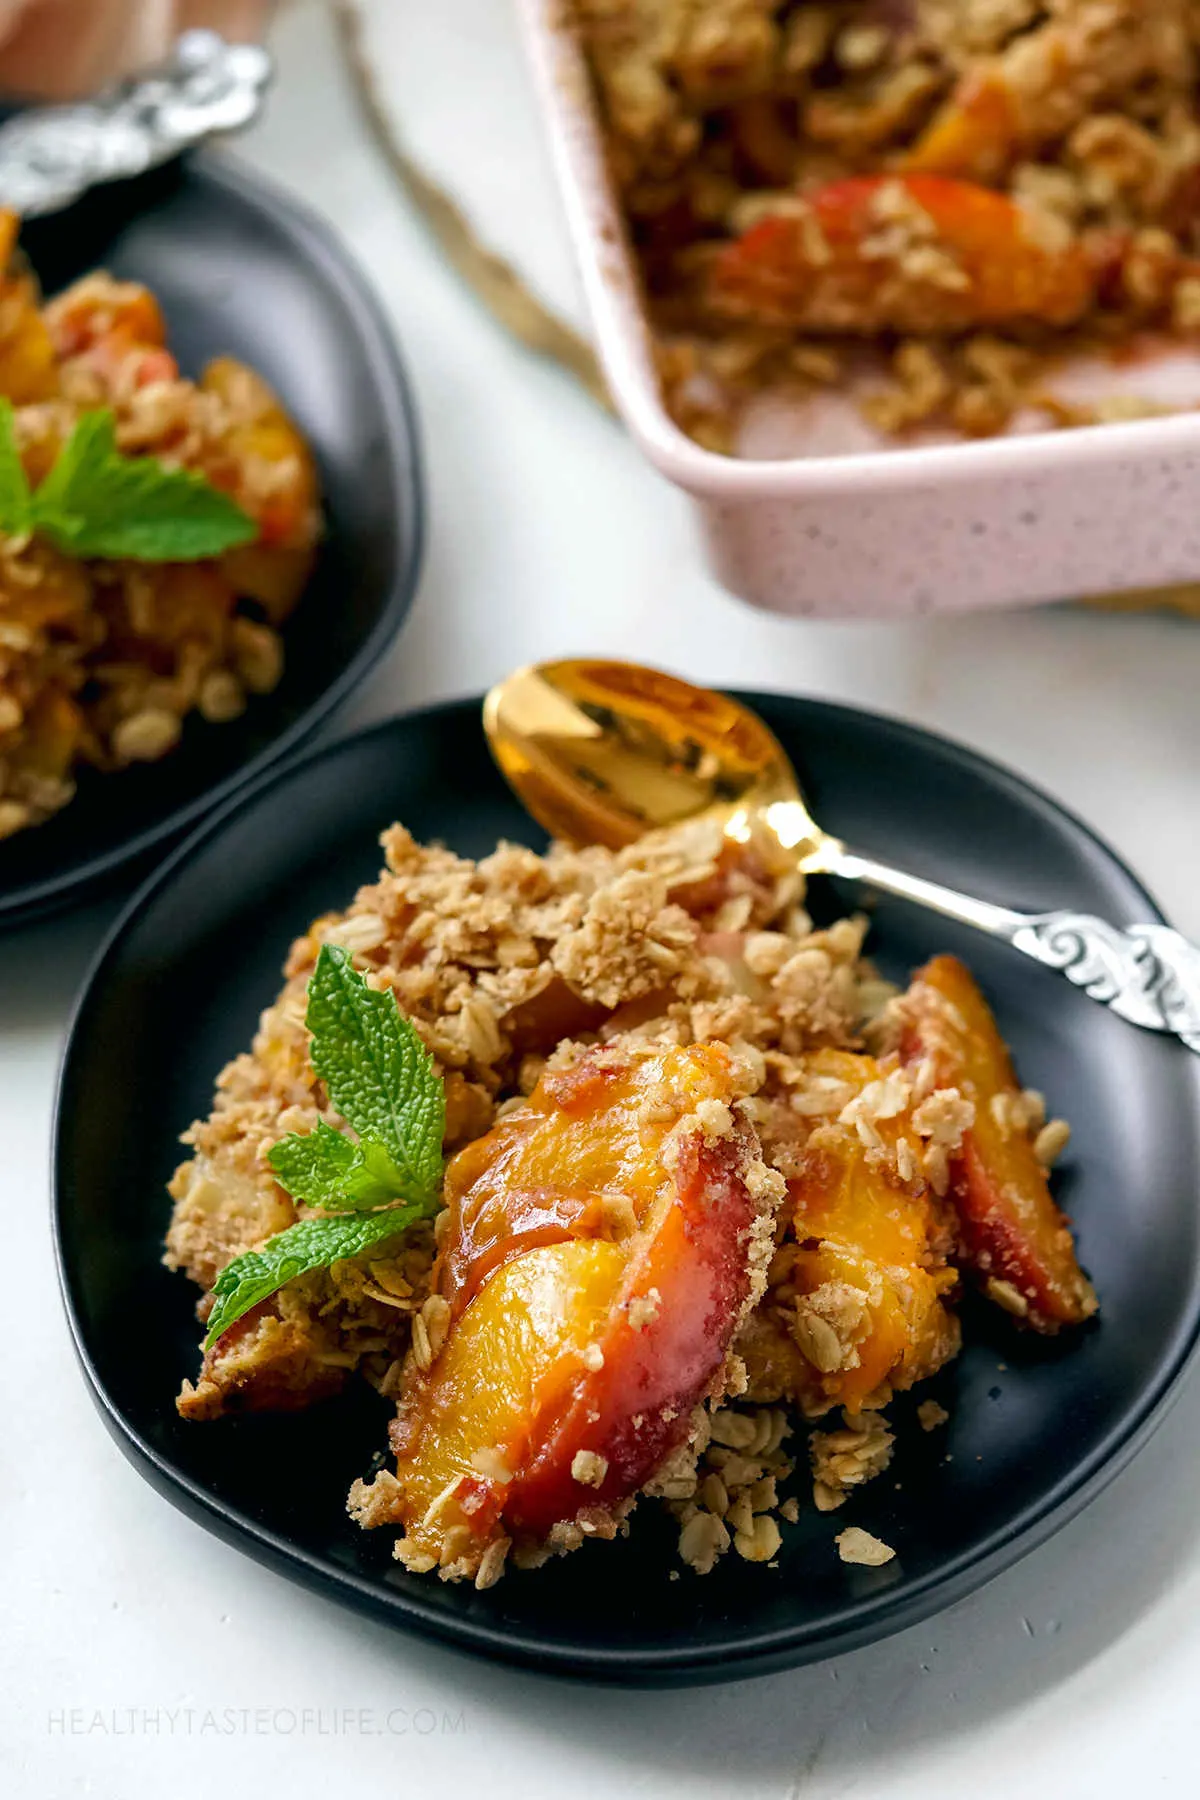 Close up shot of peach crisp showing baked peach slices covered with crunchy oat topping.